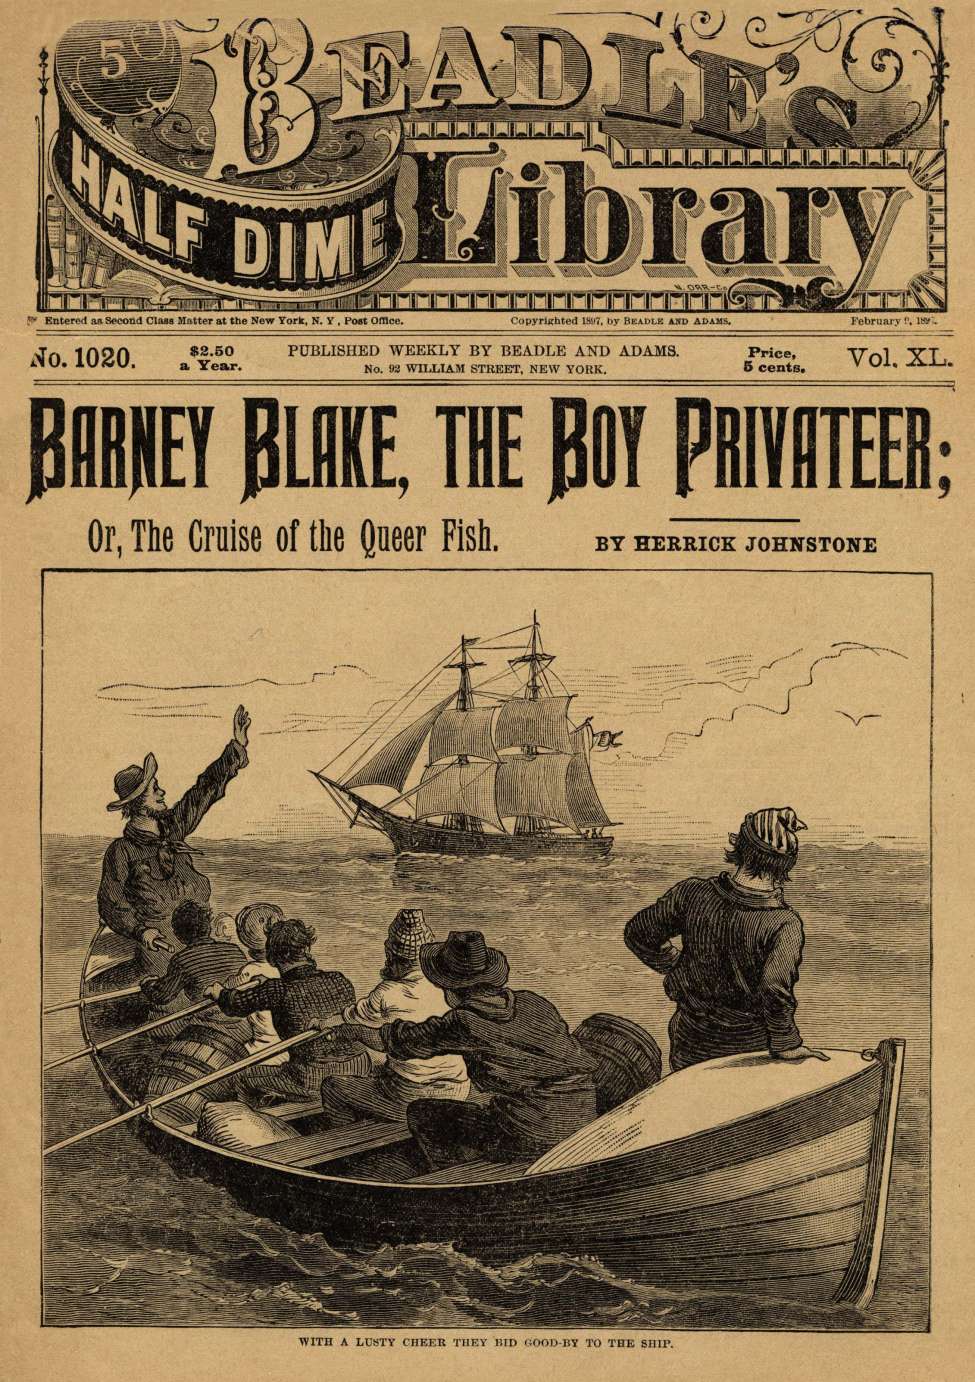 Comic Book Cover For Beadle's Half Dime Library 1020 - Barney Blake, the Boy Privateer